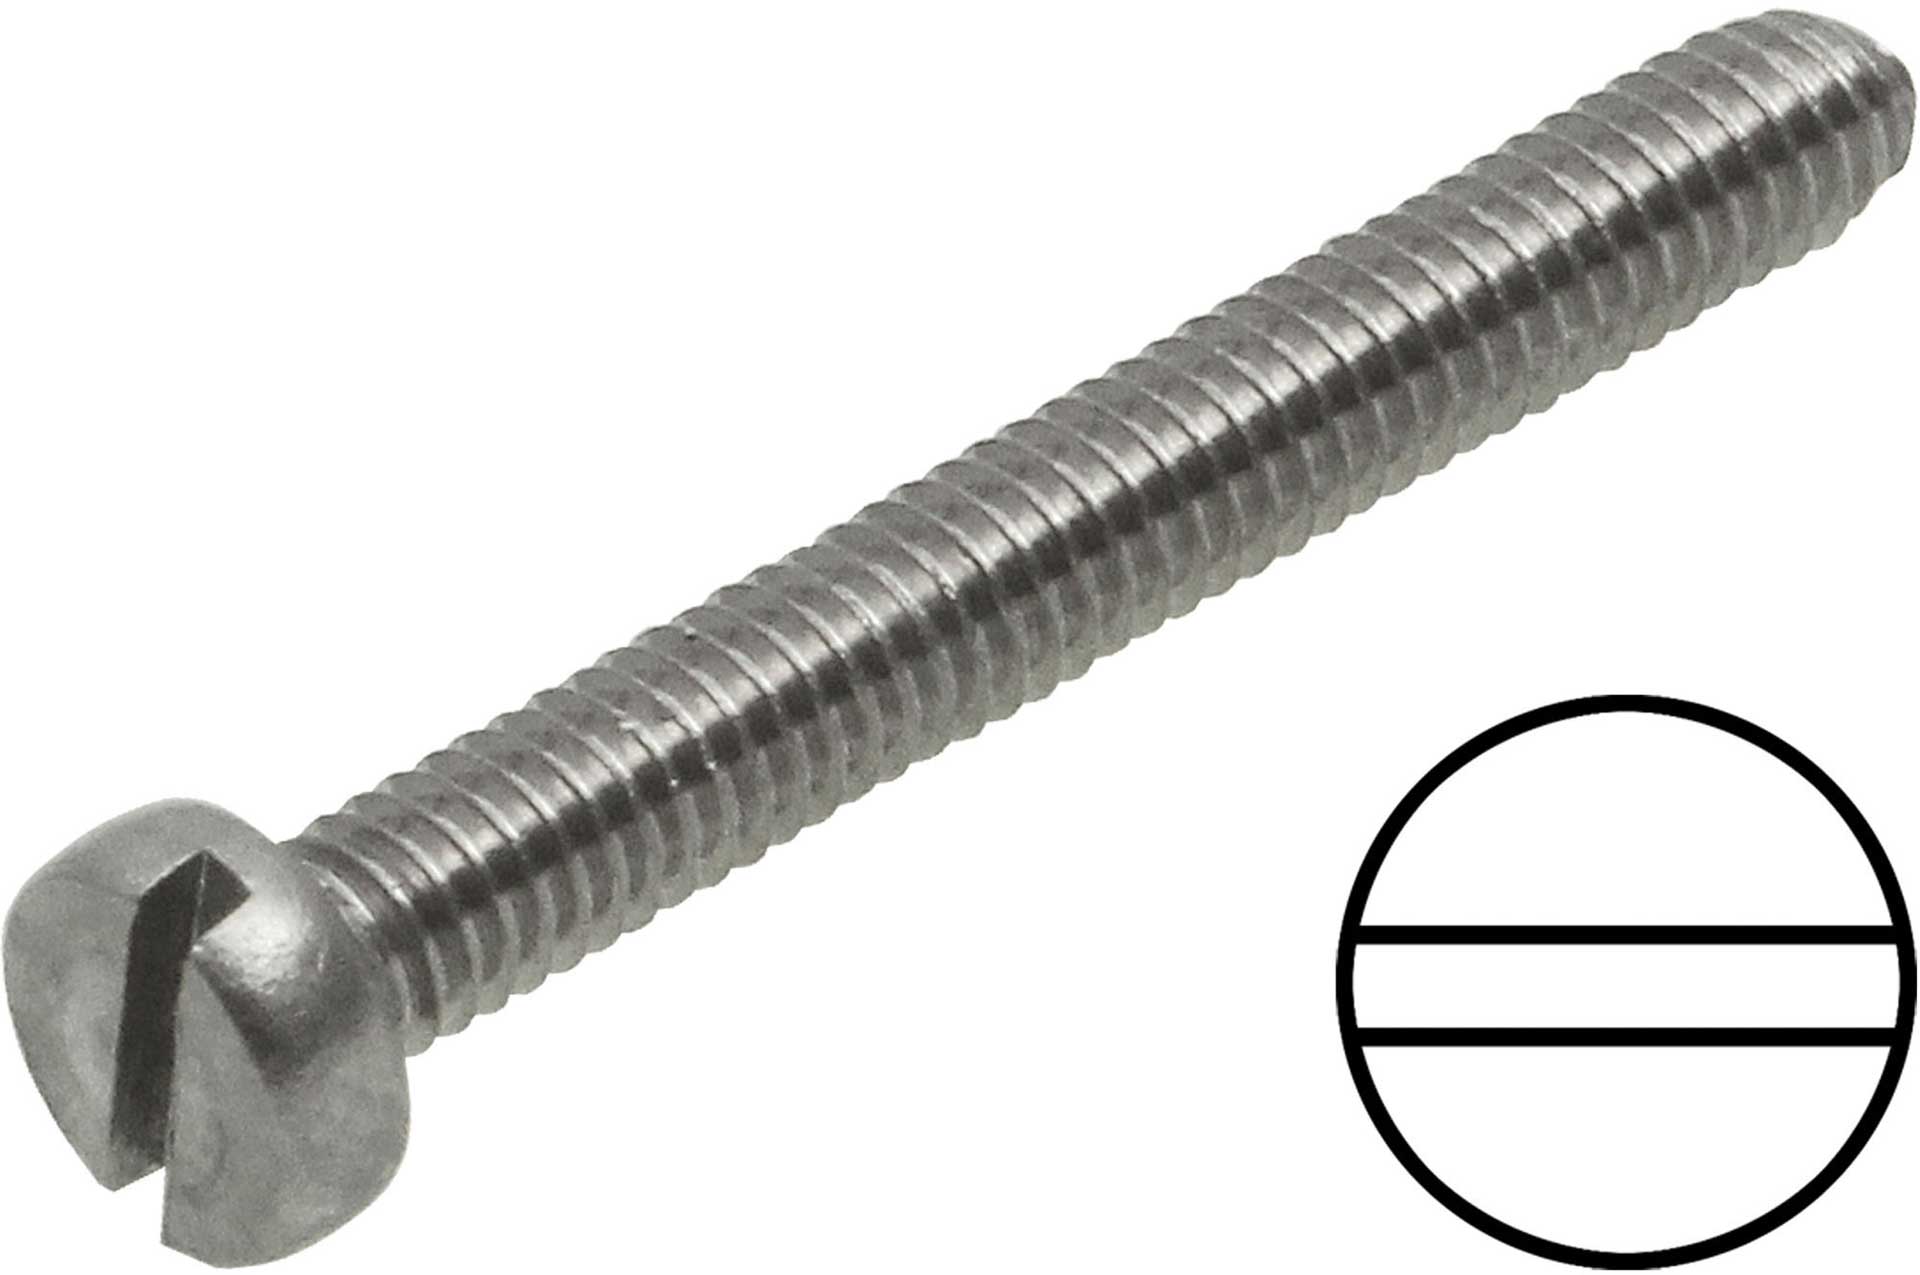 Modellbau Lindinger CHEESE-HEAD BOLTS M2.5/16MM STAINLESS STEEL, 10PCS.